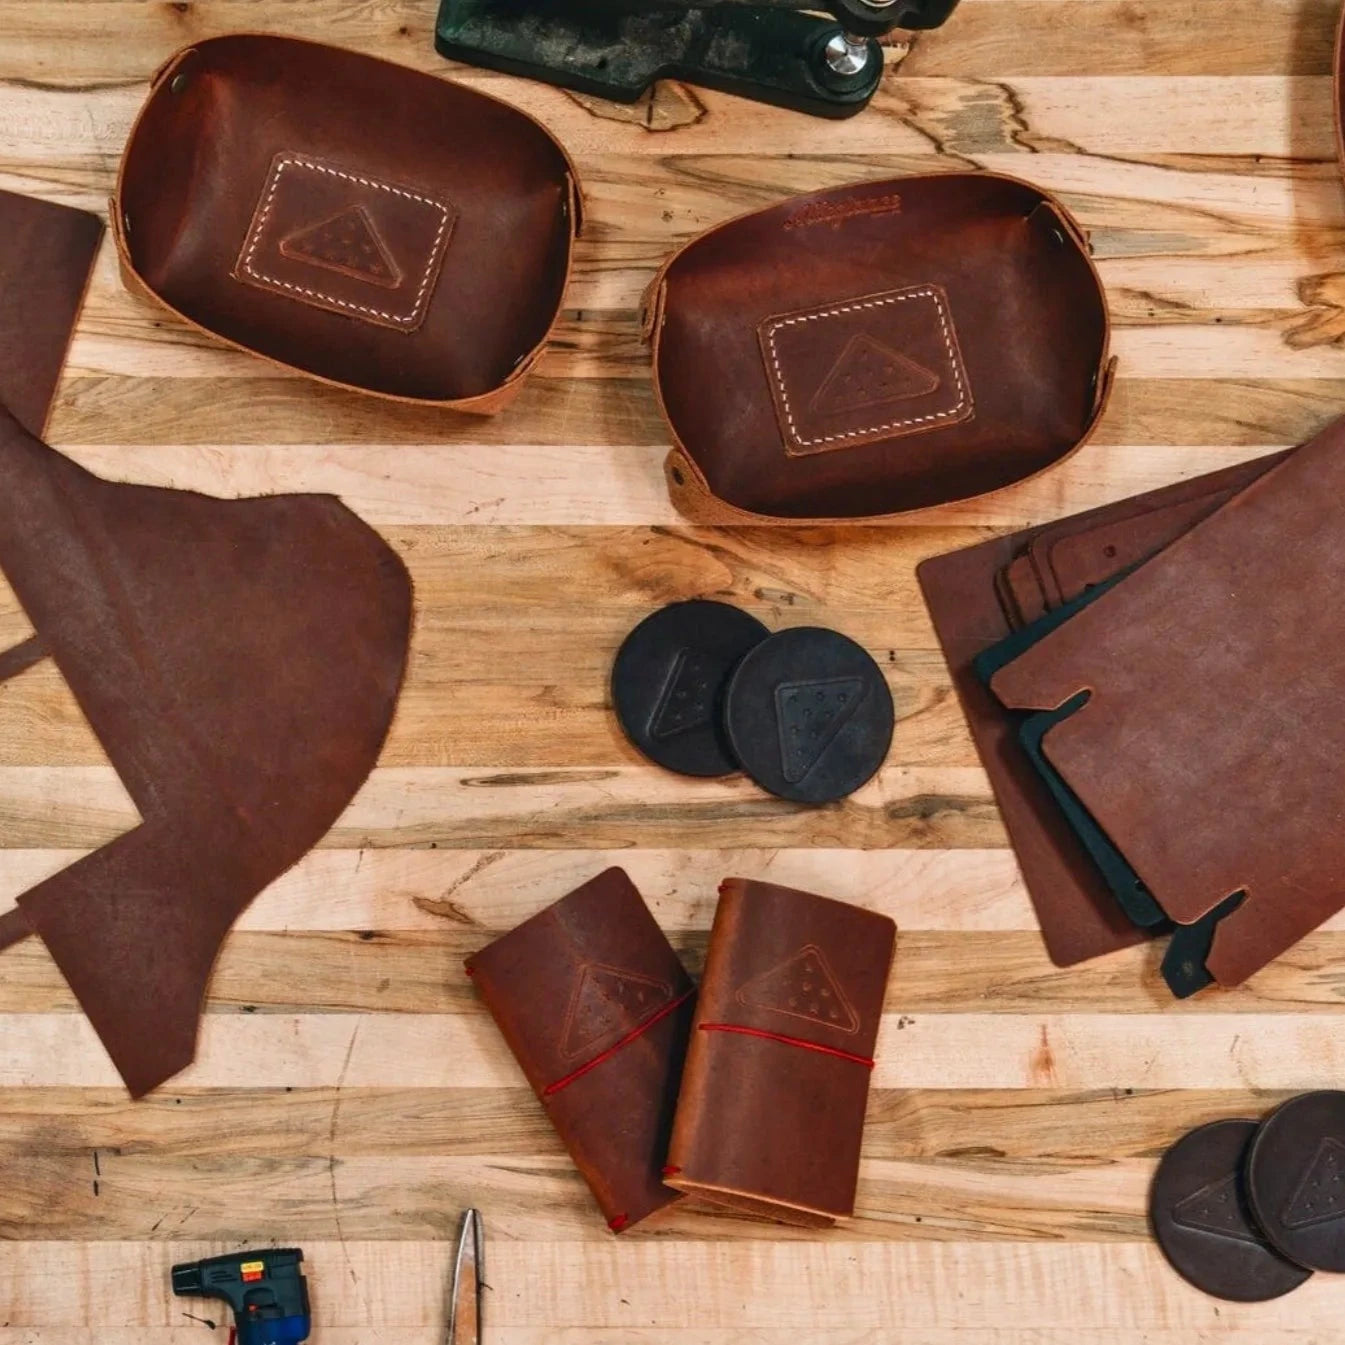 American made leather goods